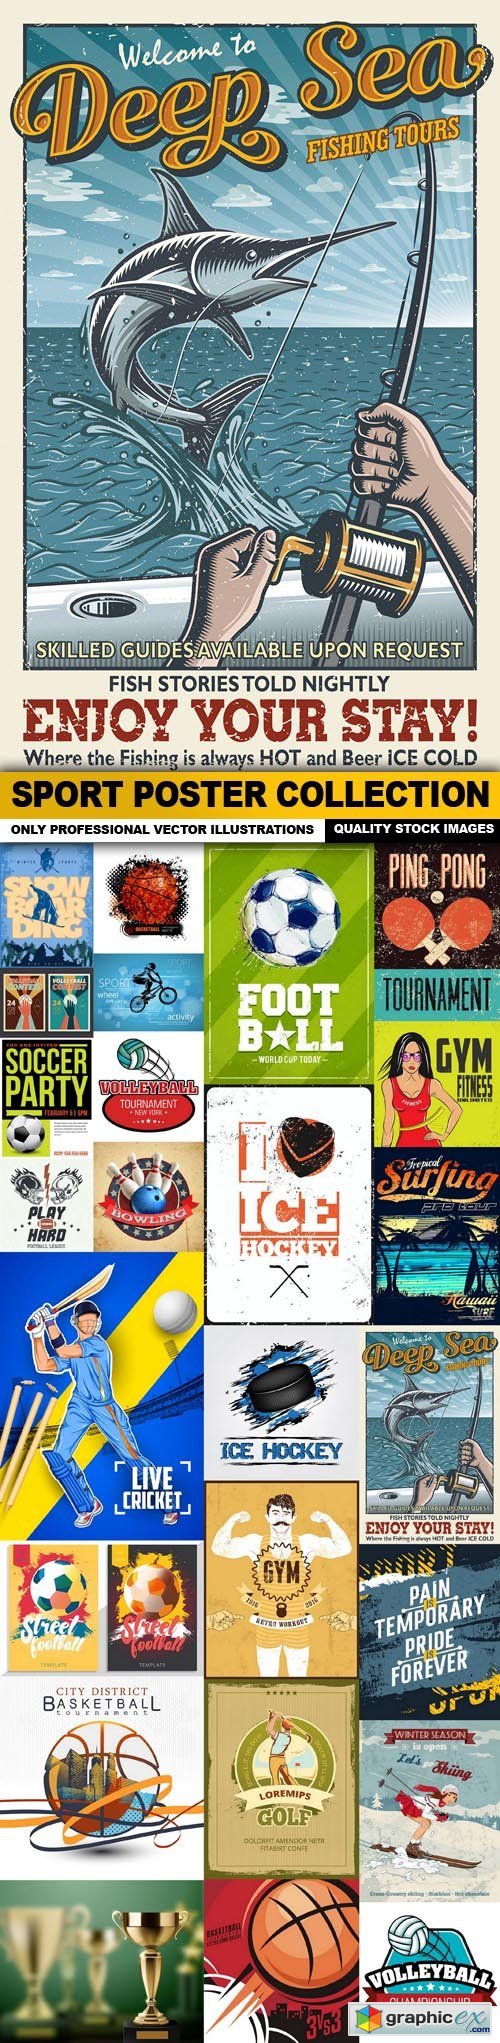 Sport Poster Collection - 25 Vector